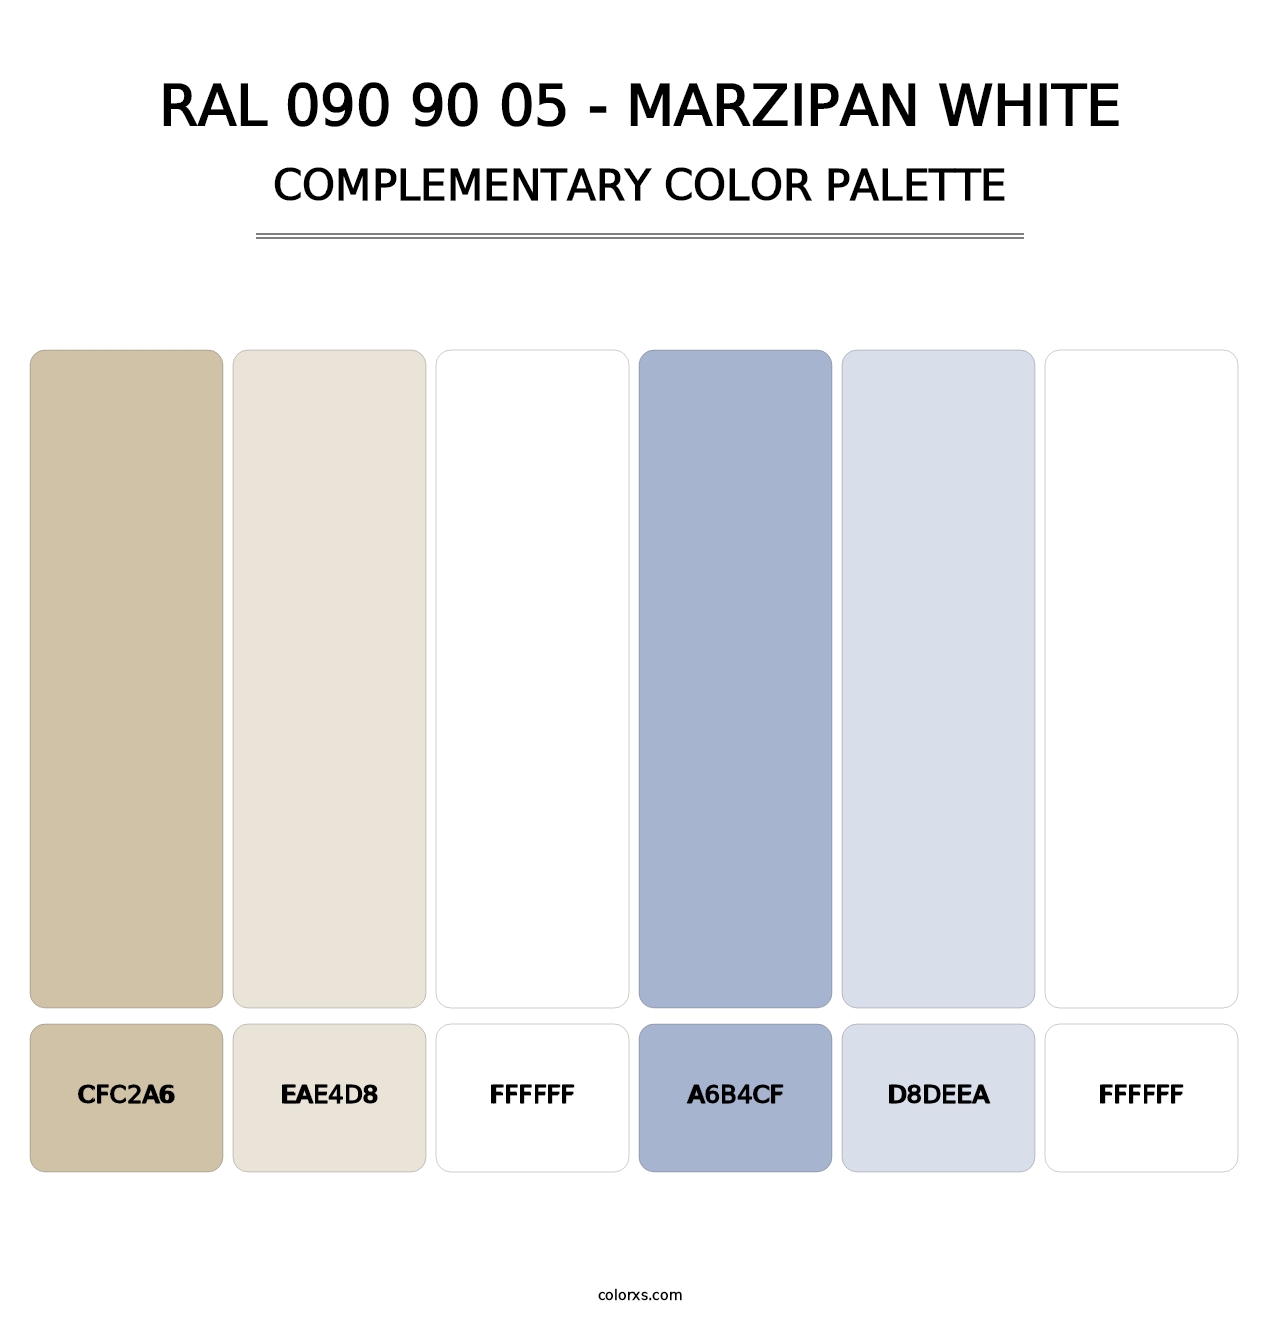 RAL 090 90 05 - Marzipan White - Complementary Color Palette